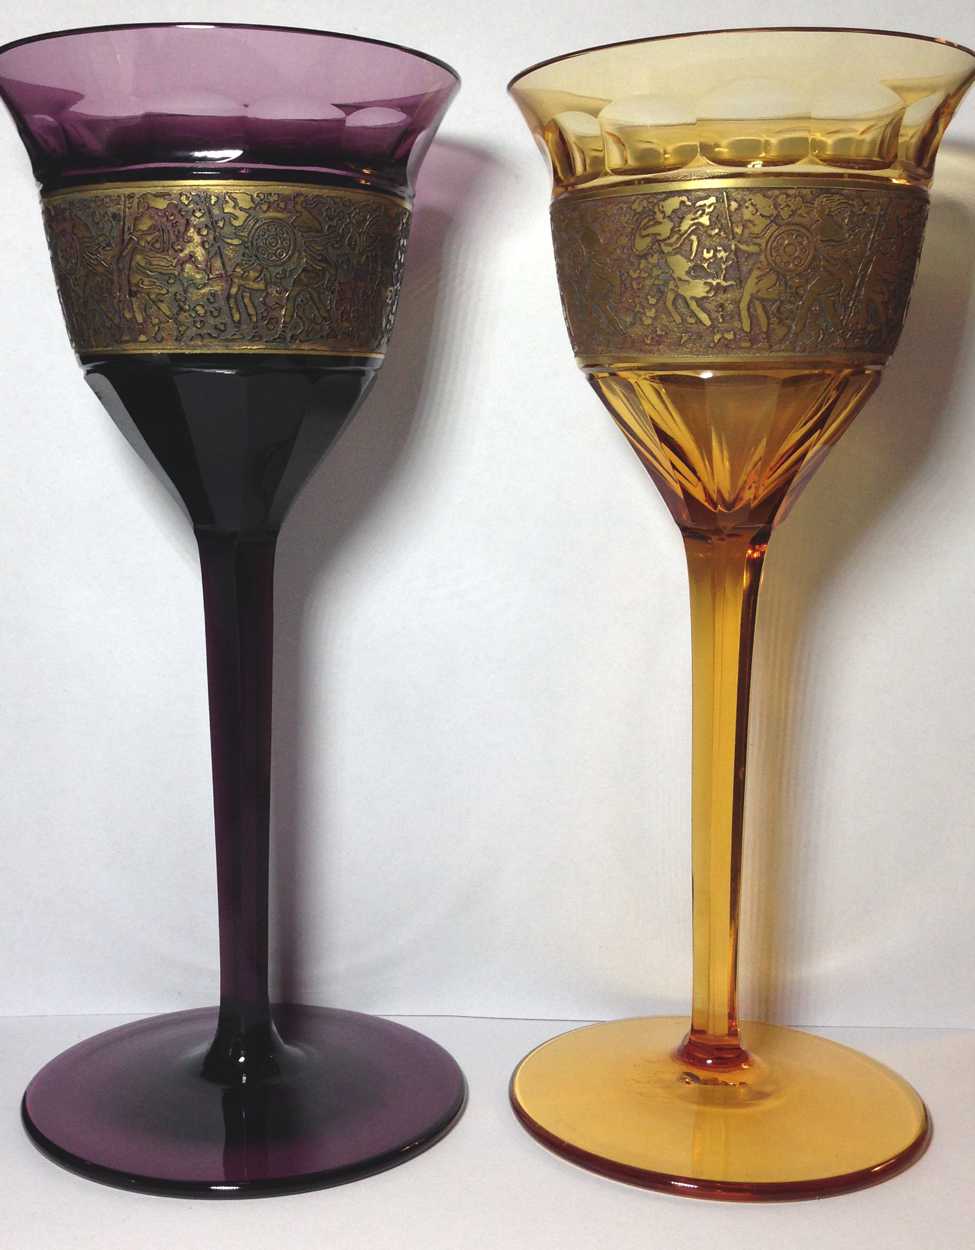 Pair Of Moser Karlsbad Wine Glasses Acid Etched And Gold Banded Dating 1918 1922 One Amber One